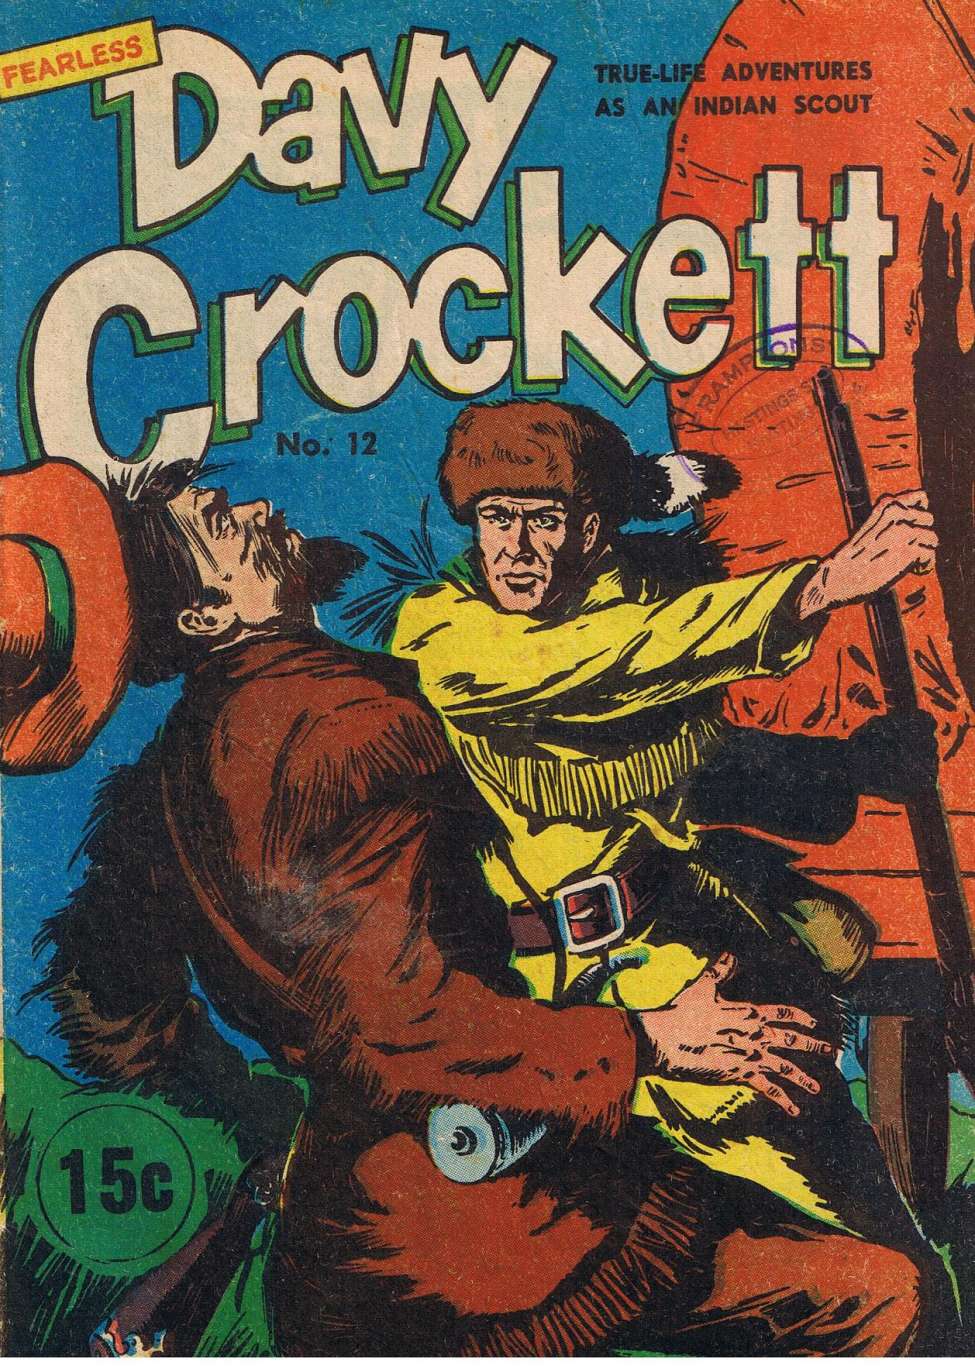 Book Cover For Fearless Davy Crockett 12